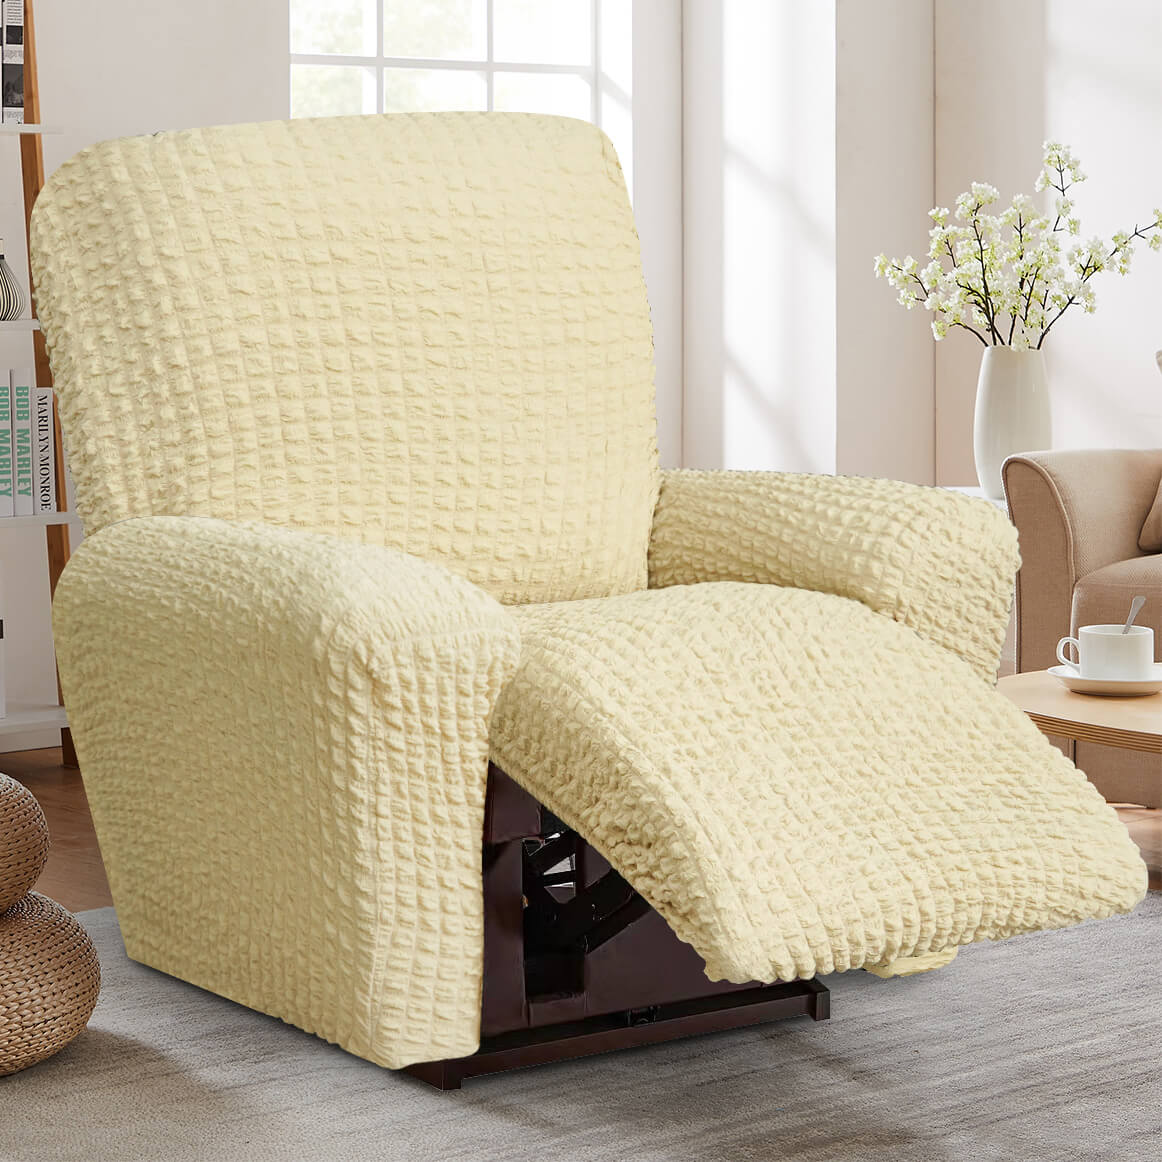 Crfatop High Quality Recliner Seater Cover Seersucker Fabric Reclining Couch Cover ChairYellow